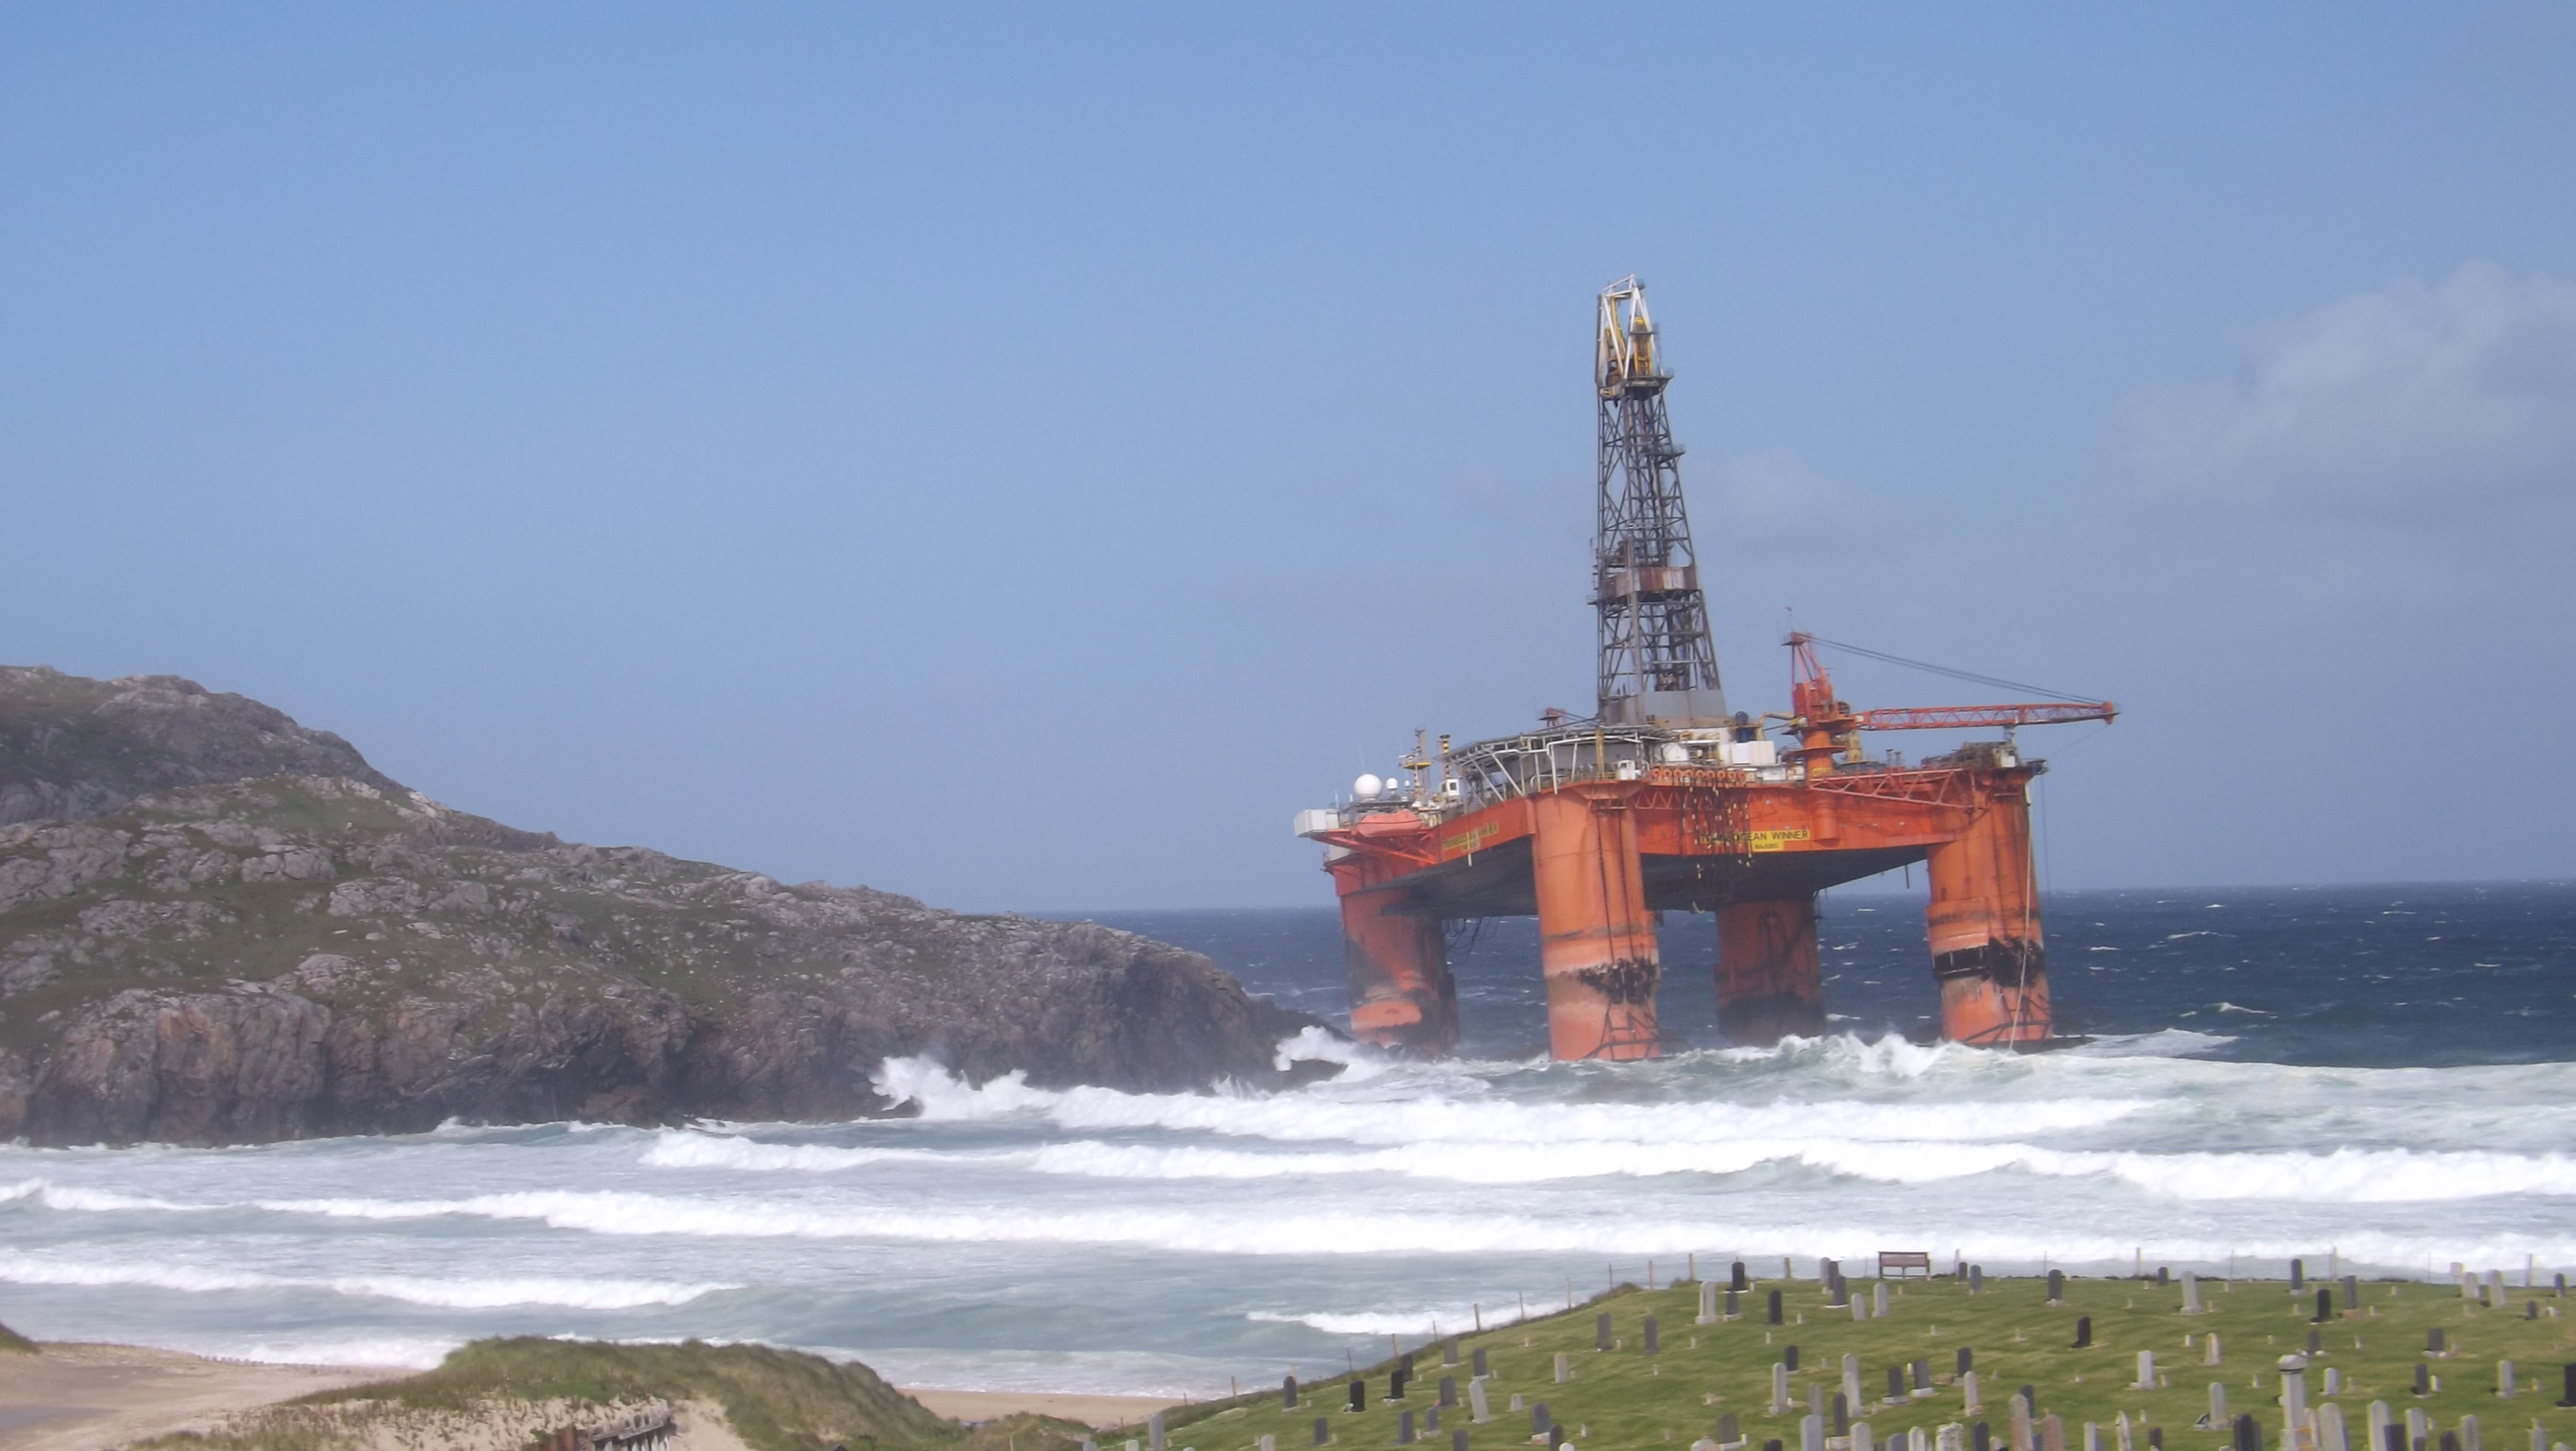 Transocean's drilling rig aground 